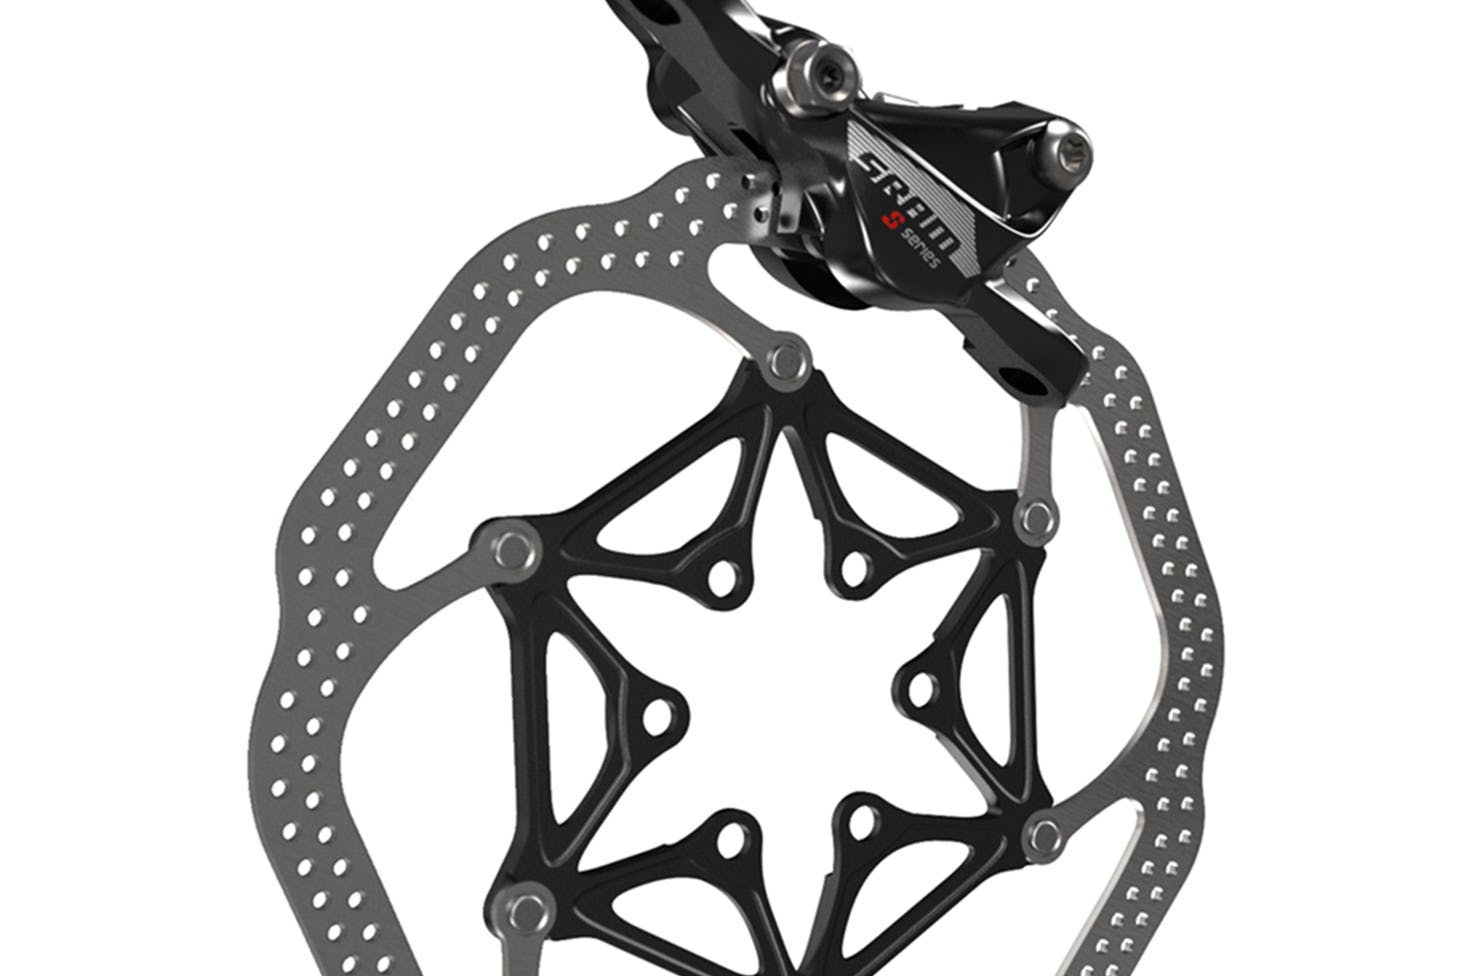 According to SRAM the additional gear was the only improvement missing on the Red and Force groupsets launched in 2012. - Photo SRAM
